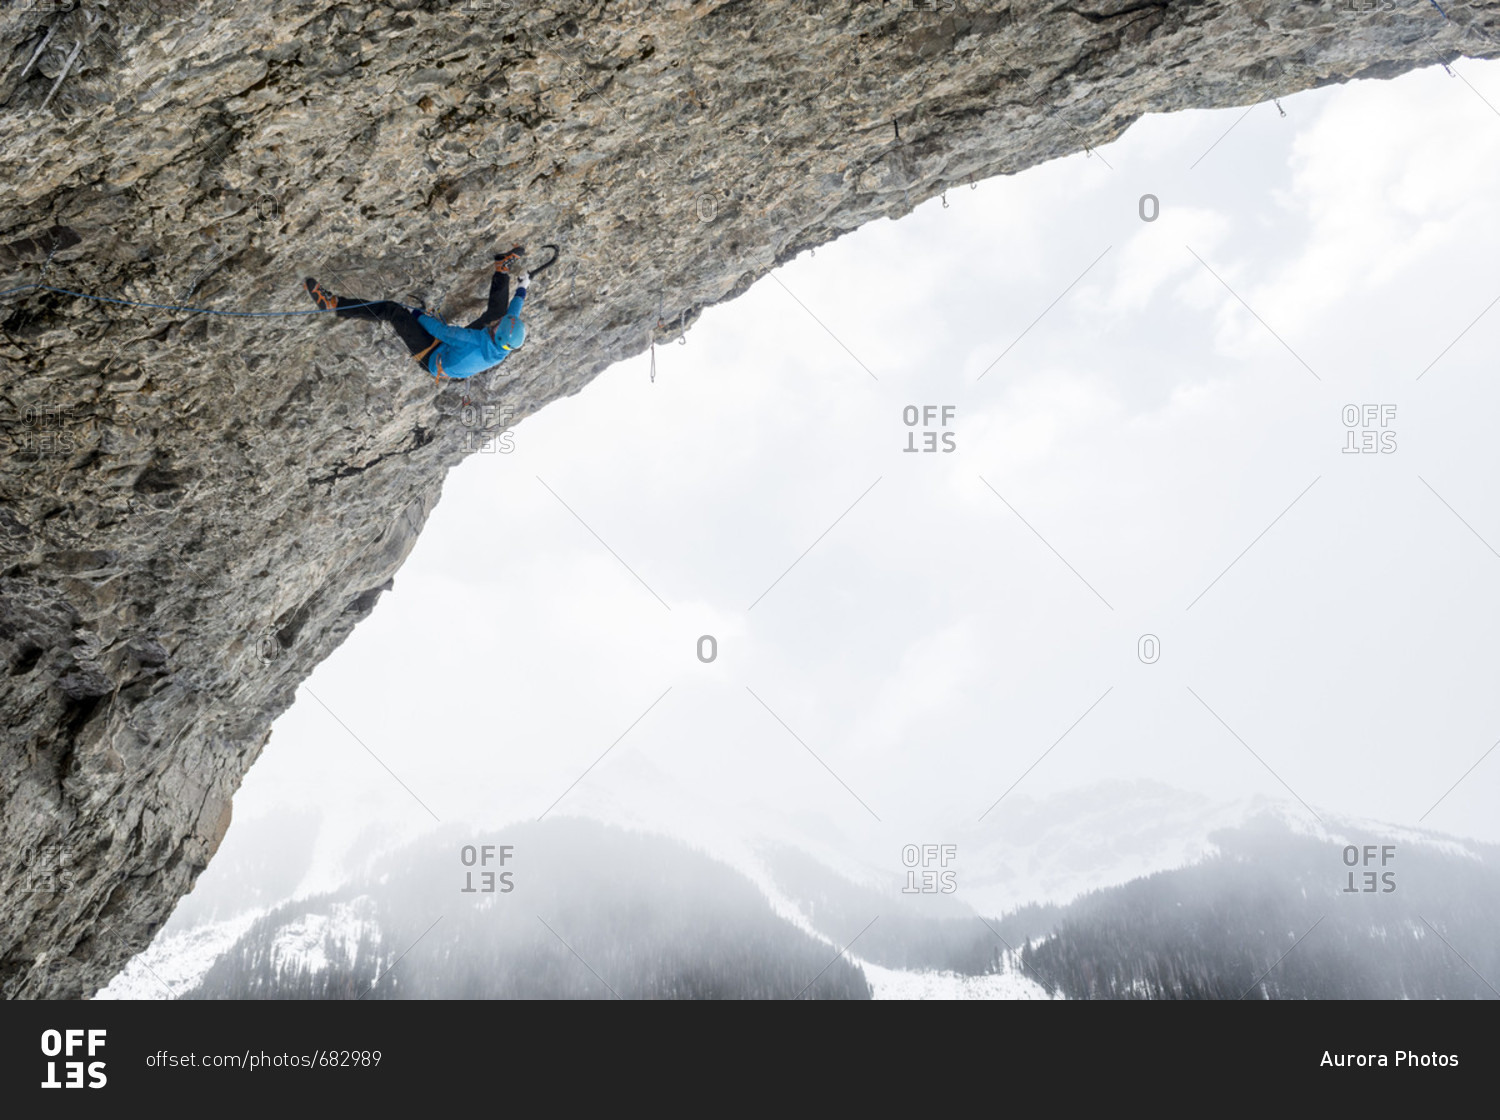 Man rock climbing overhanging cave route called Pull the Trigger Tigga at Hall of Justice, Camp Bird Road, Uncompahgre National Forest, Ouray, Colorado, USA